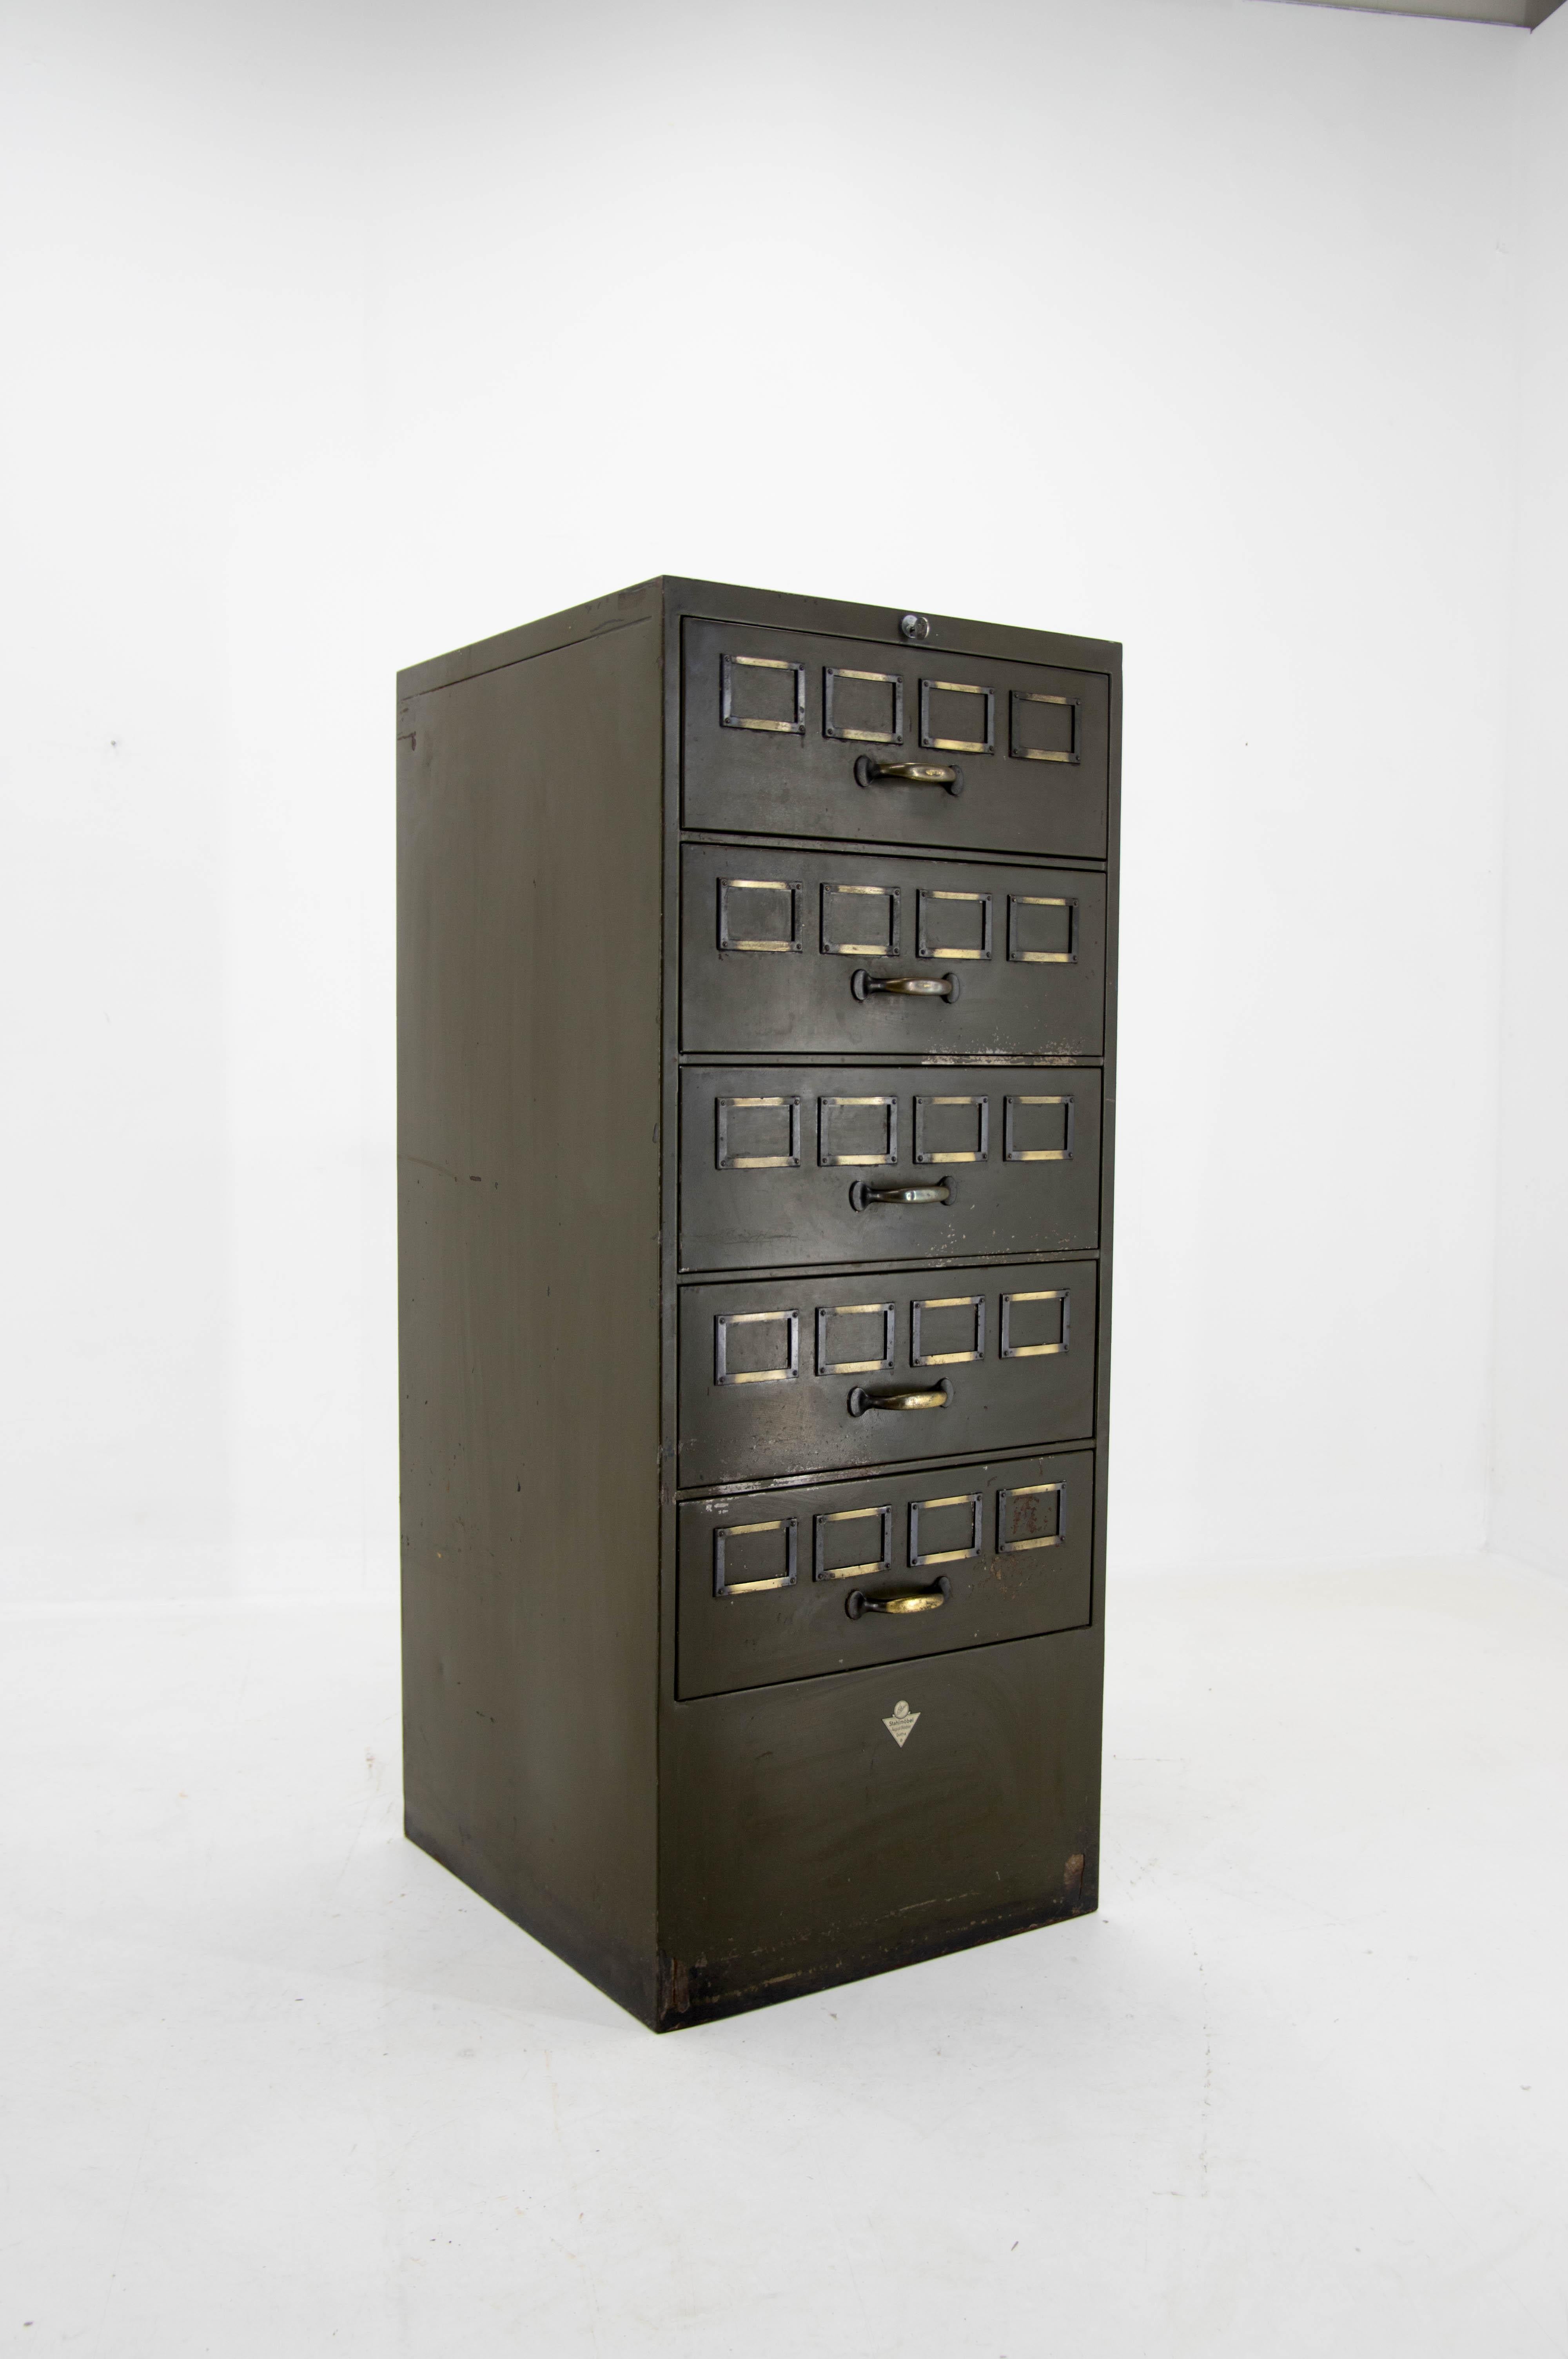 Multi drawer card filing cabinet marked by Stahlmobel August Blodner, Gotha. Used in office in Bauhaus factory in Czechoslovakia. Item is in a very good original condition, lock and drawers runs smoothly.
Shipping quote on request.